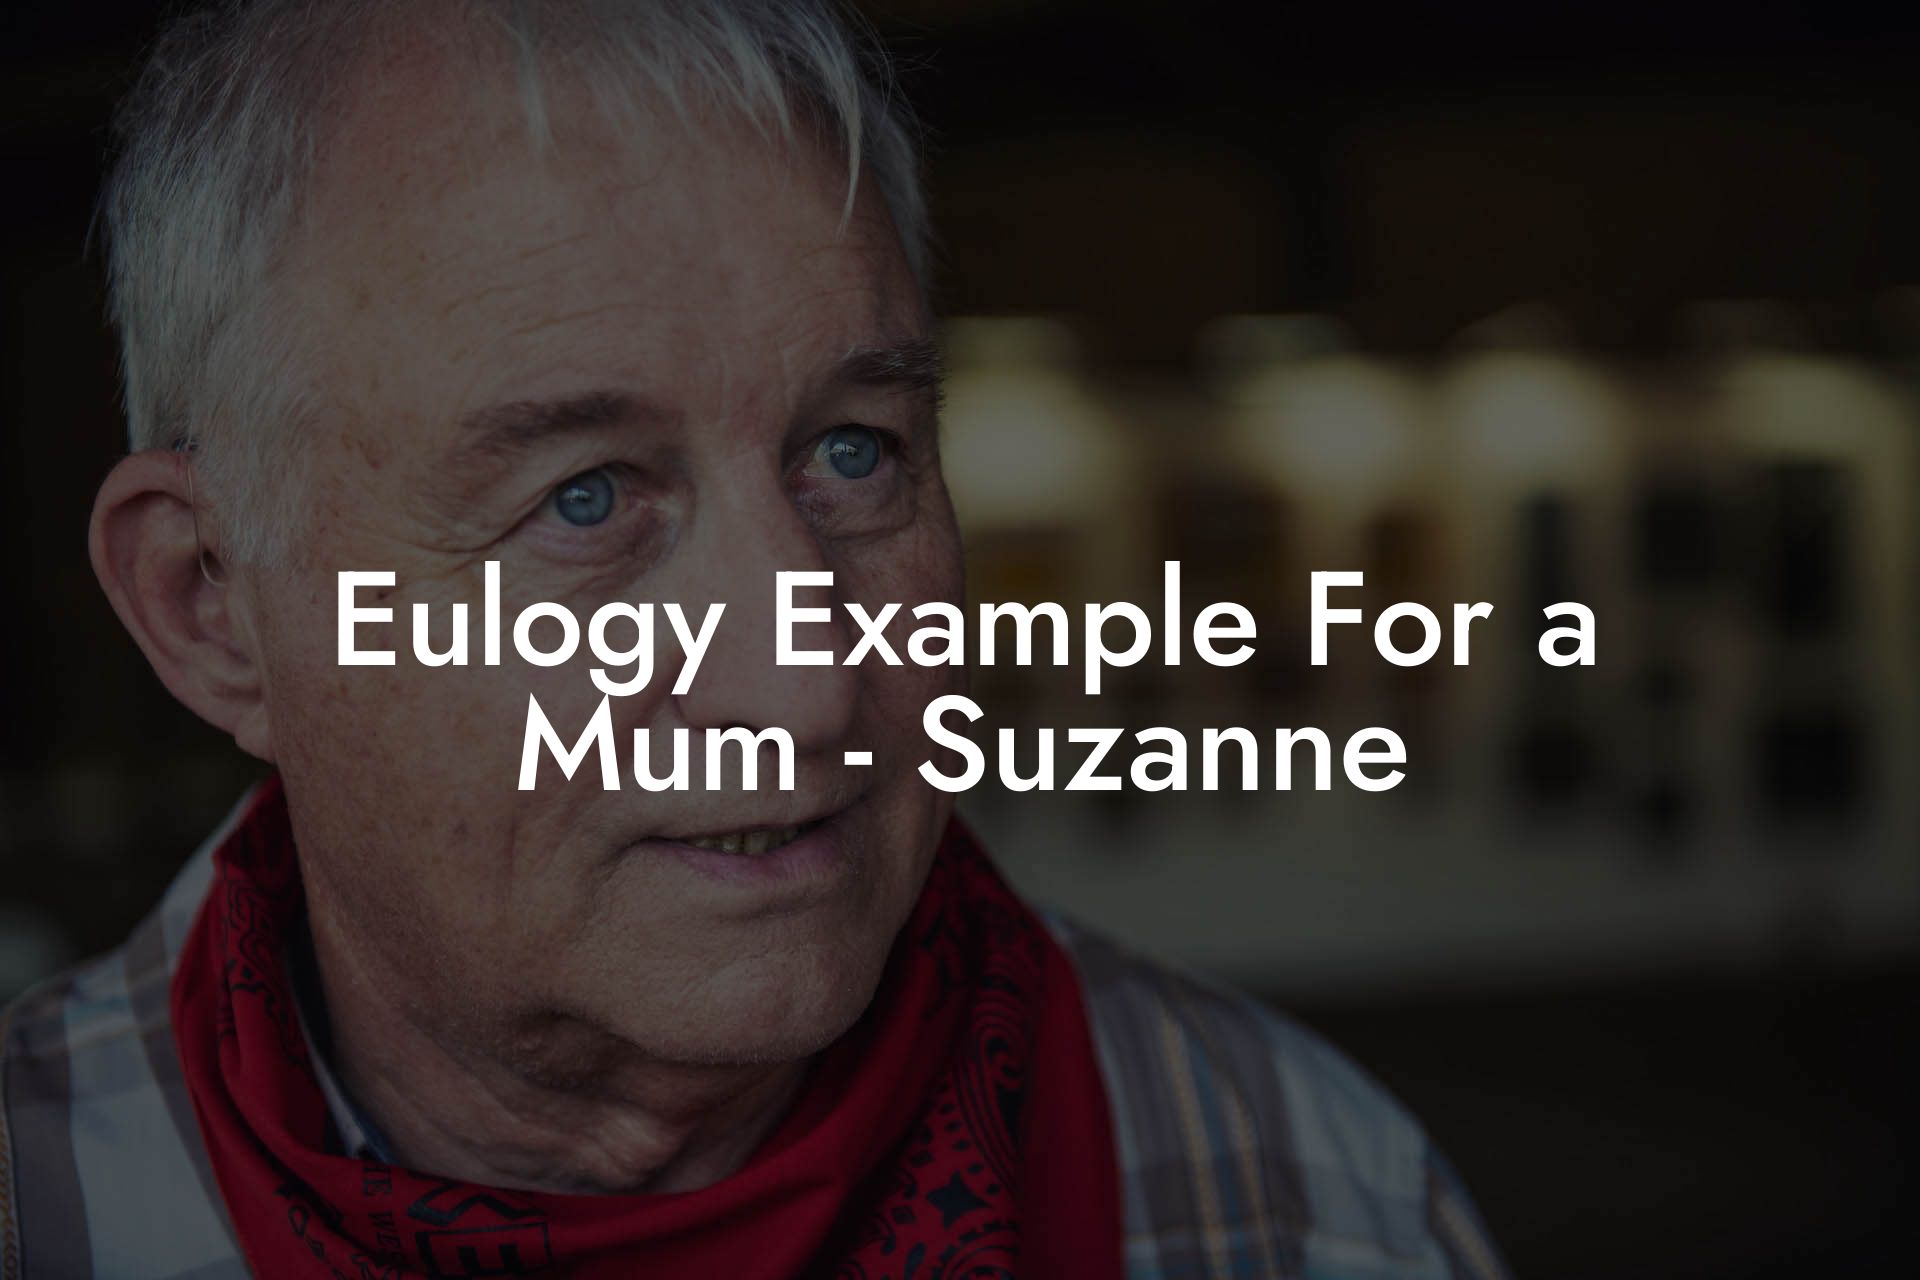 Eulogy Example For a Mum - Suzanne